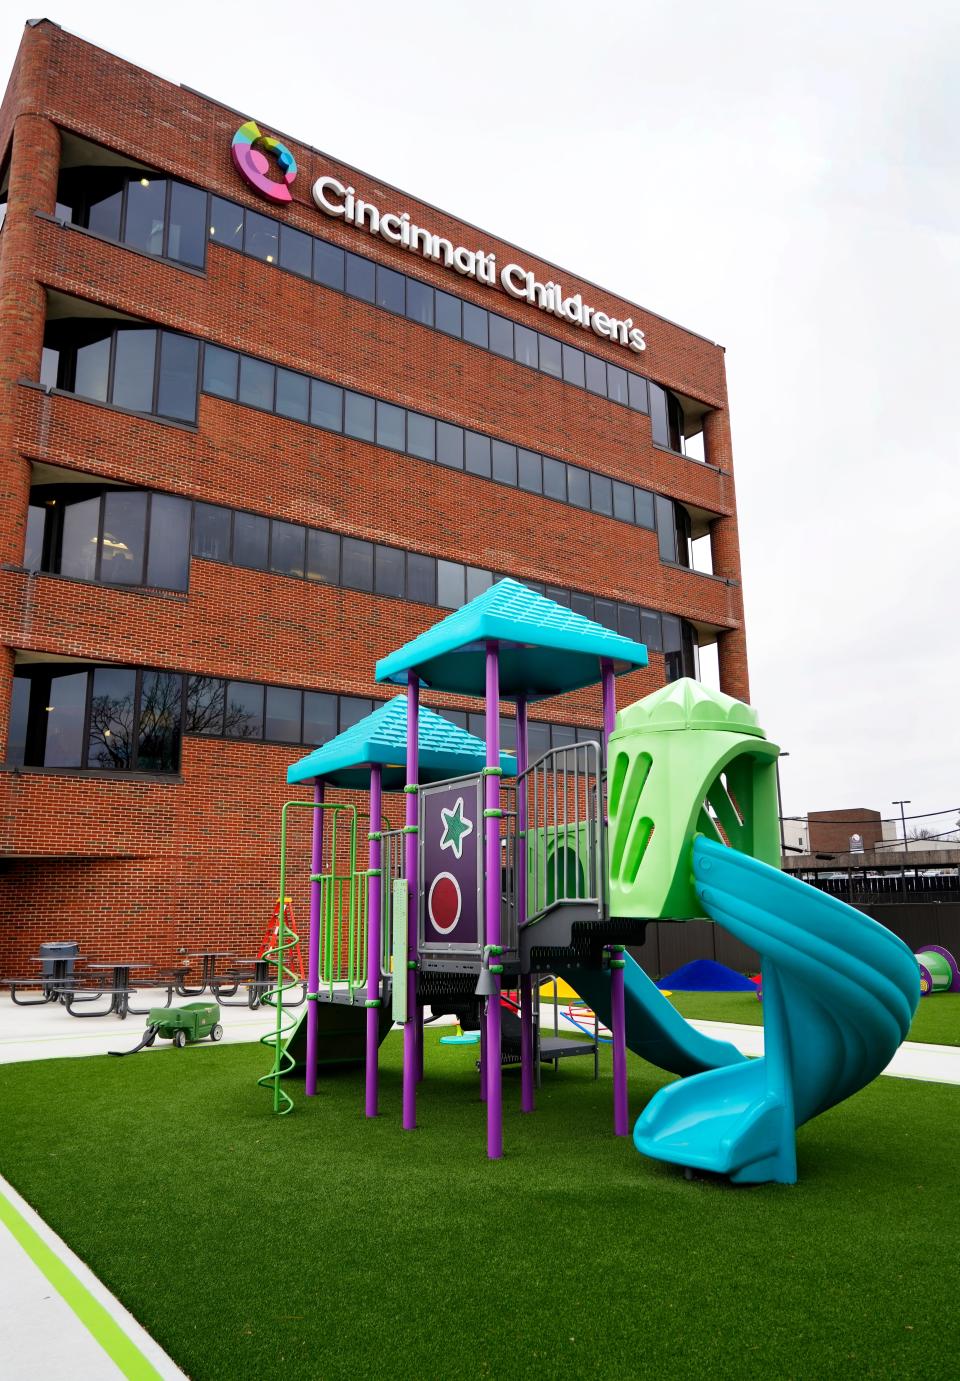 In September, Cincinnati Children’s Hospital moved its Therapeutic Interagency Program to this new location in Walnut Hills. The day treatment program is for kids 3-5 years of age who have experienced some sort of trauma in their lives.